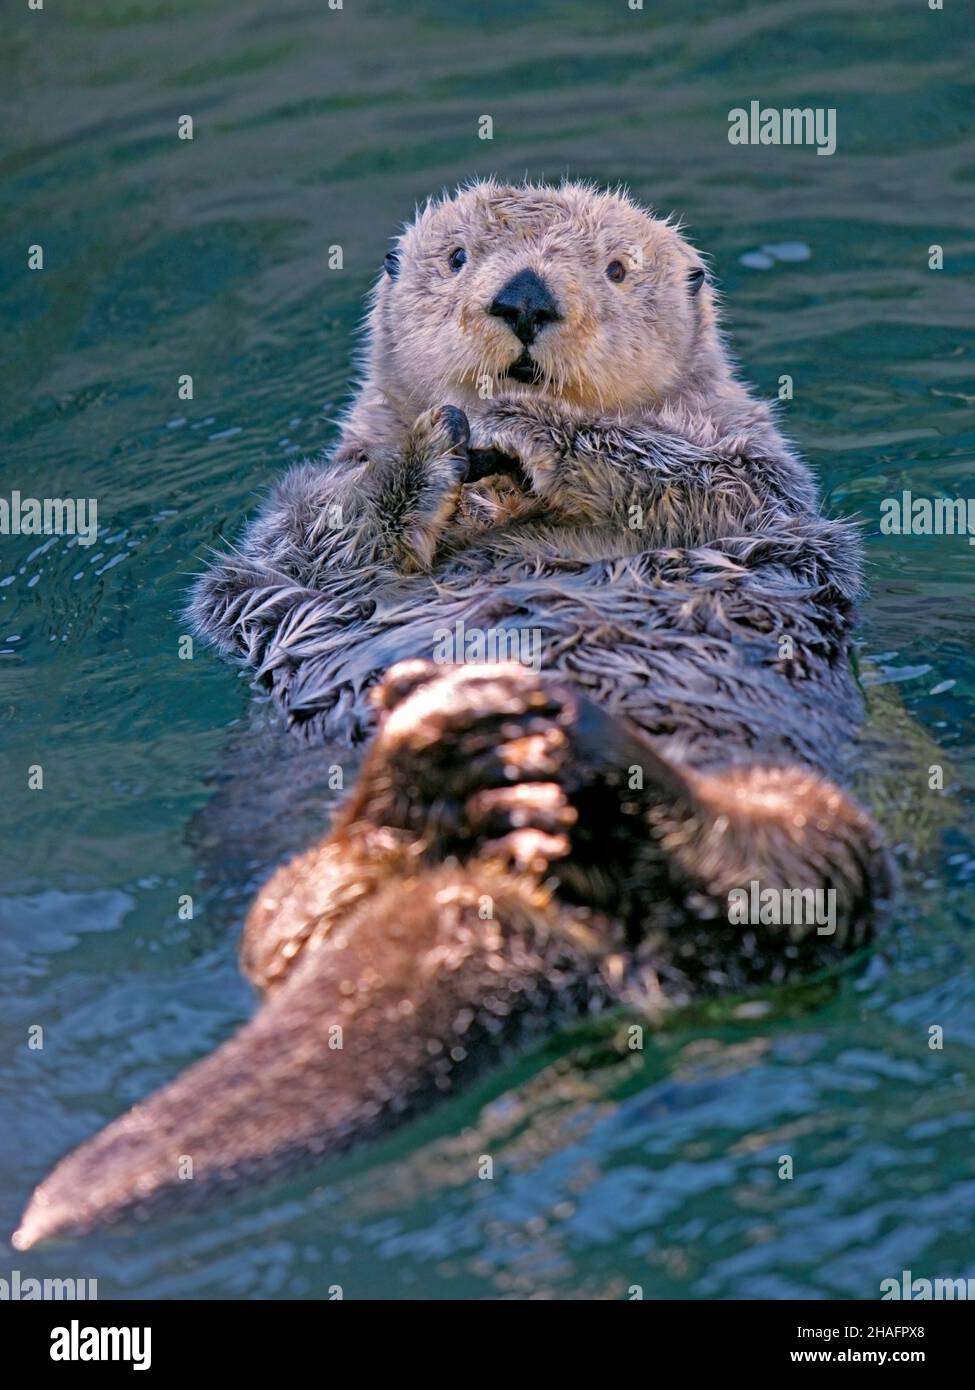 Adorable Sea otter in the water, floating on its back, looking up. Stock Photo